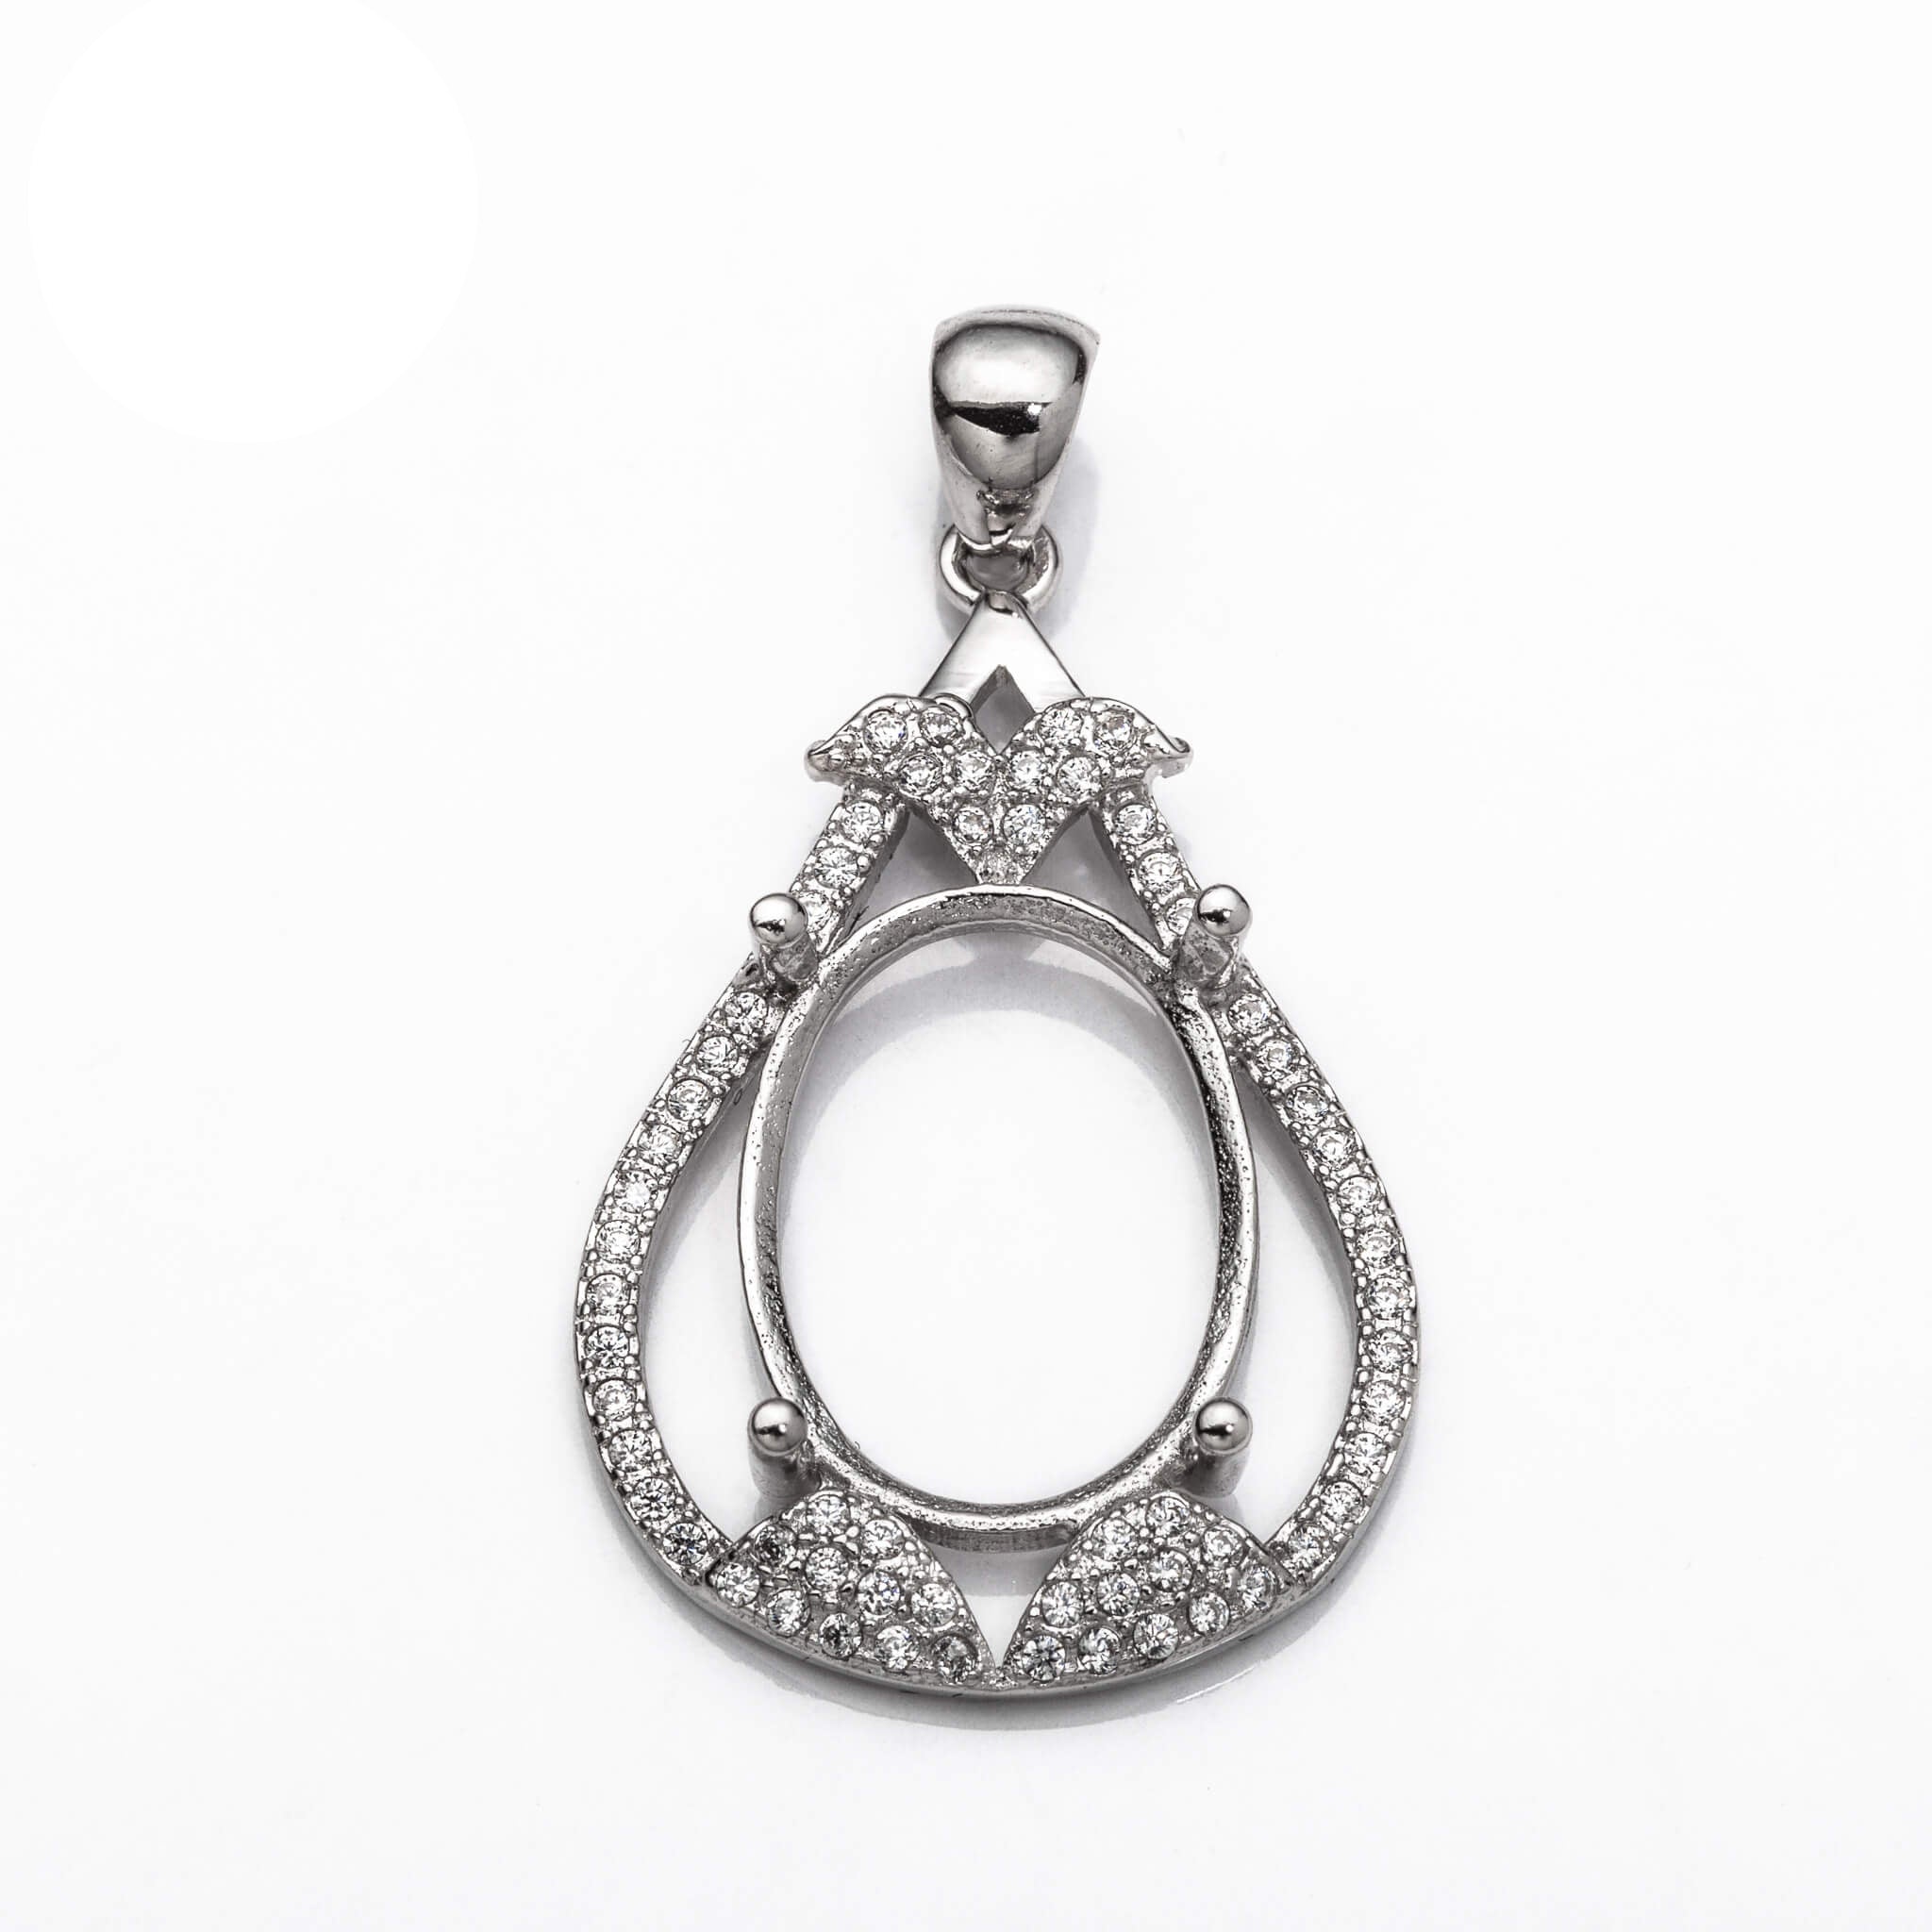 Pear Pendant with Cubic Zirconia Inlays and Oval Mounting and Bail in Sterling Silver 11x15mm